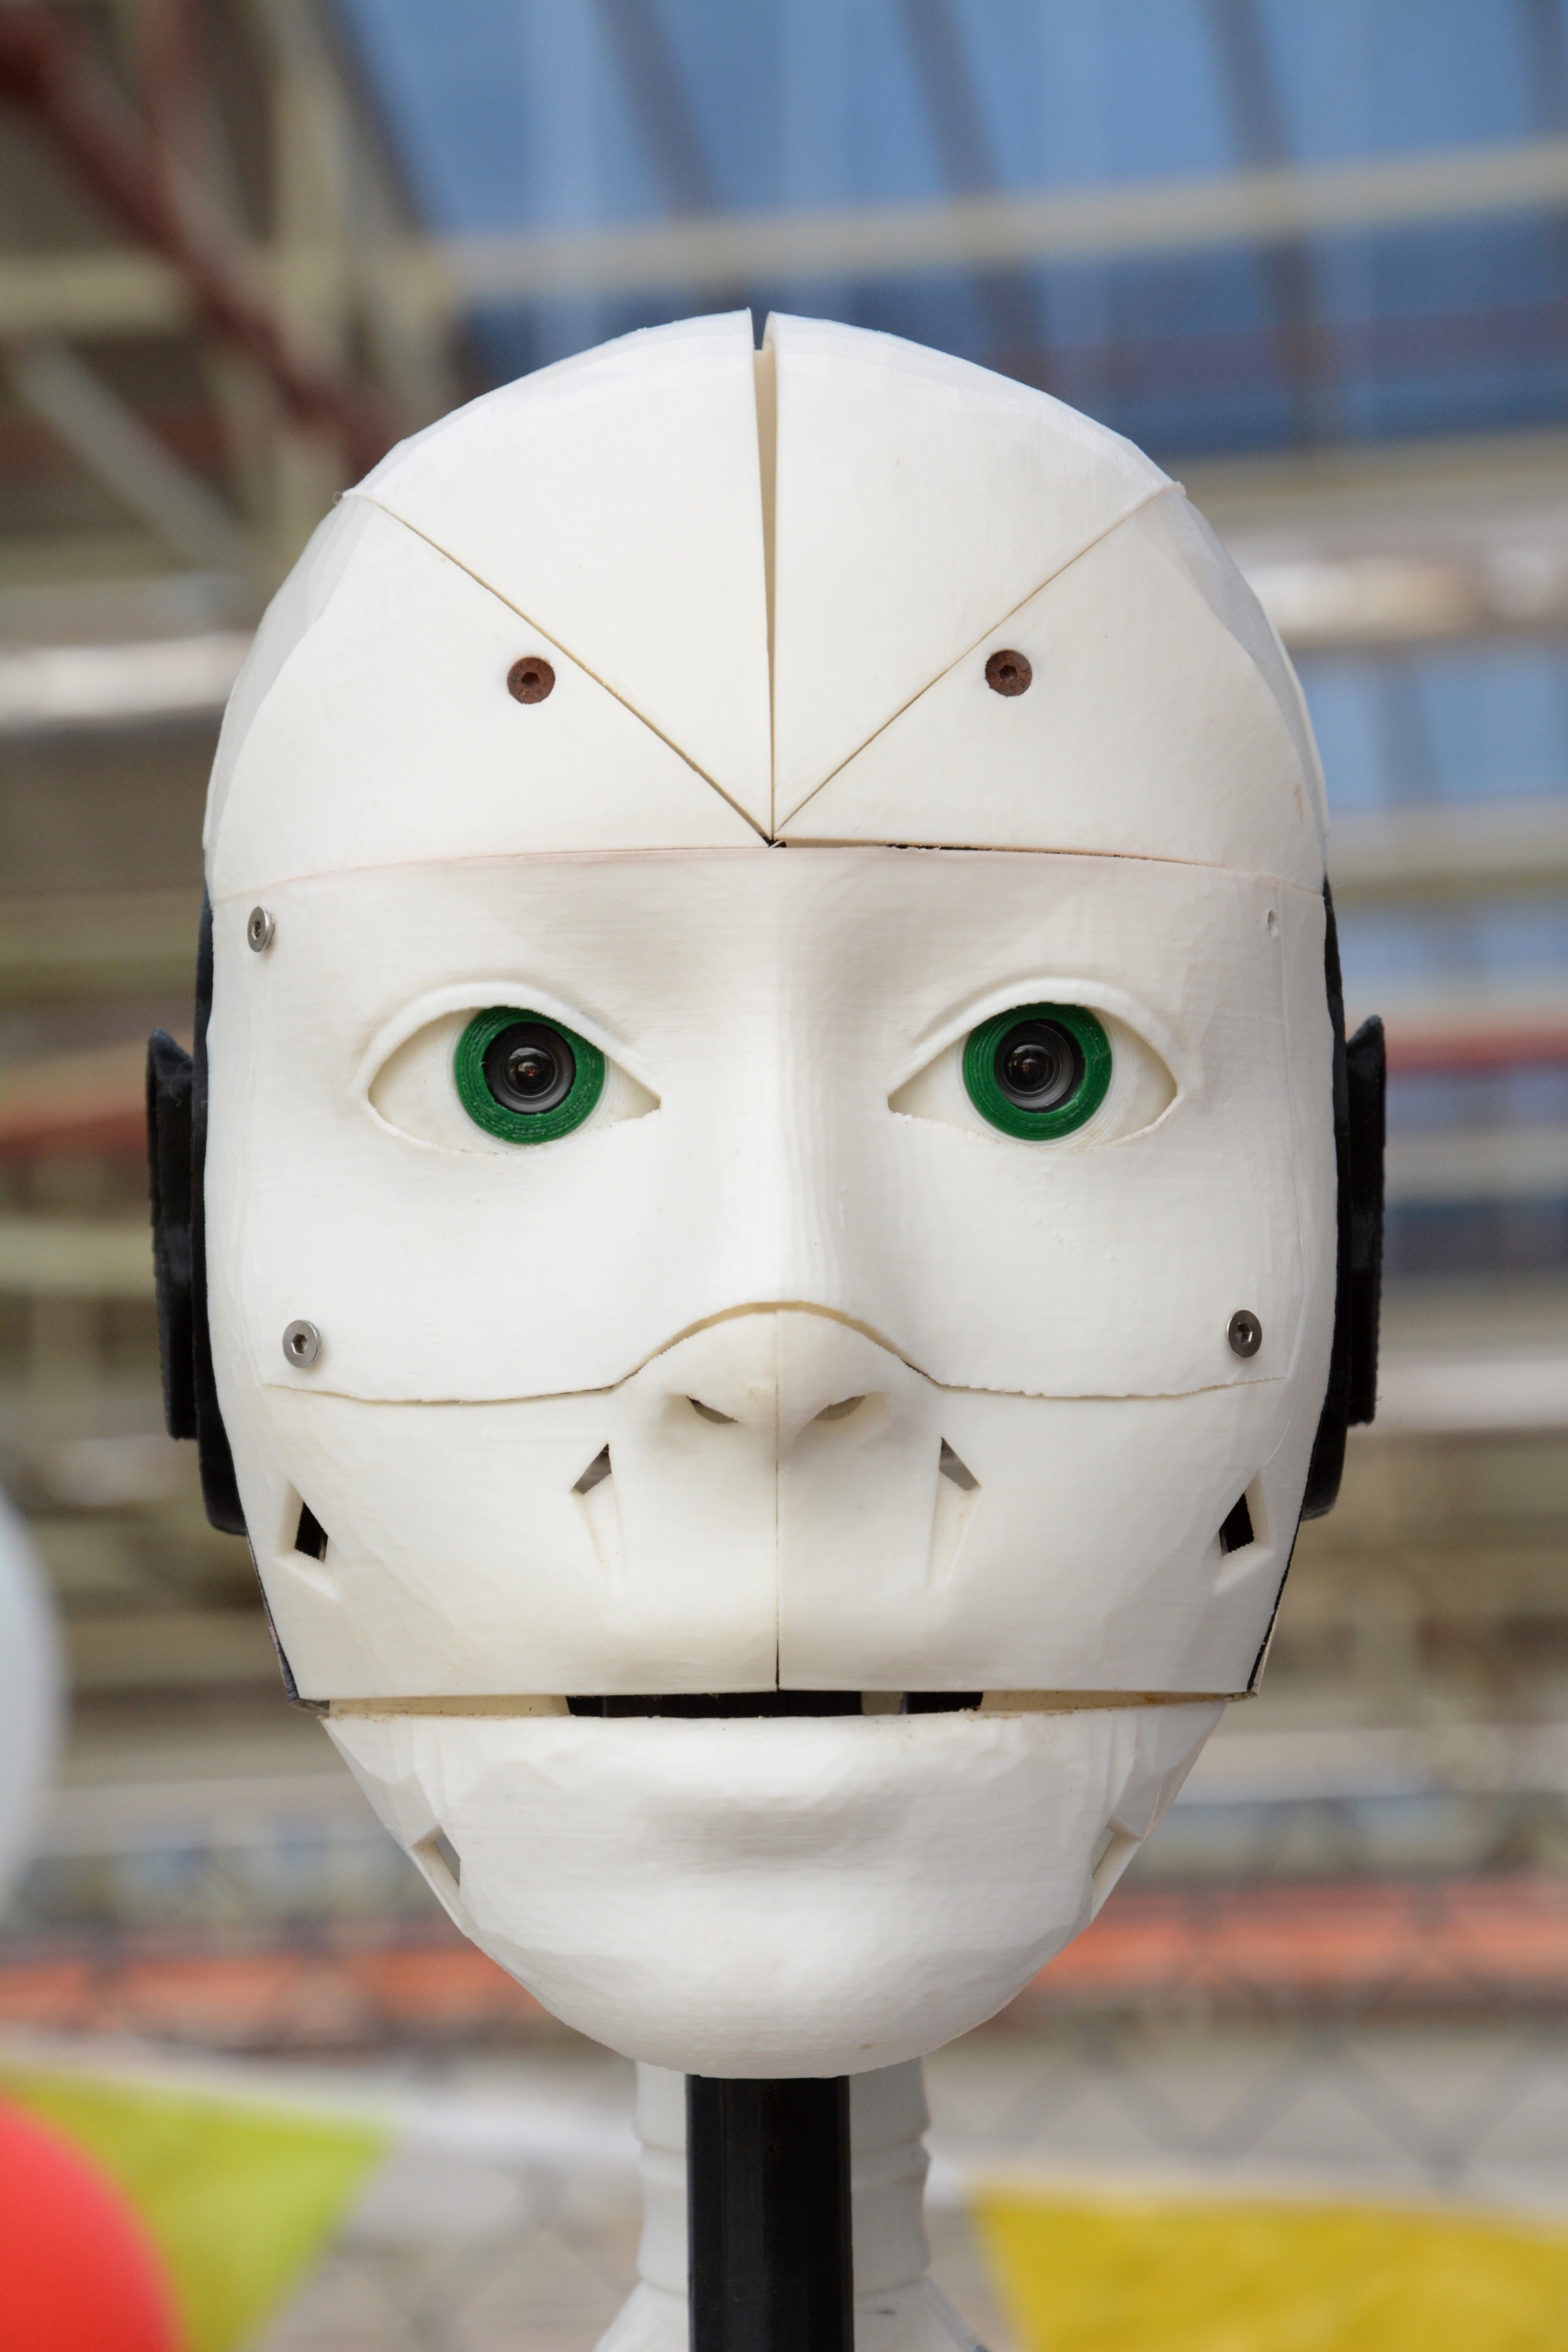 A close up of the face of a robot